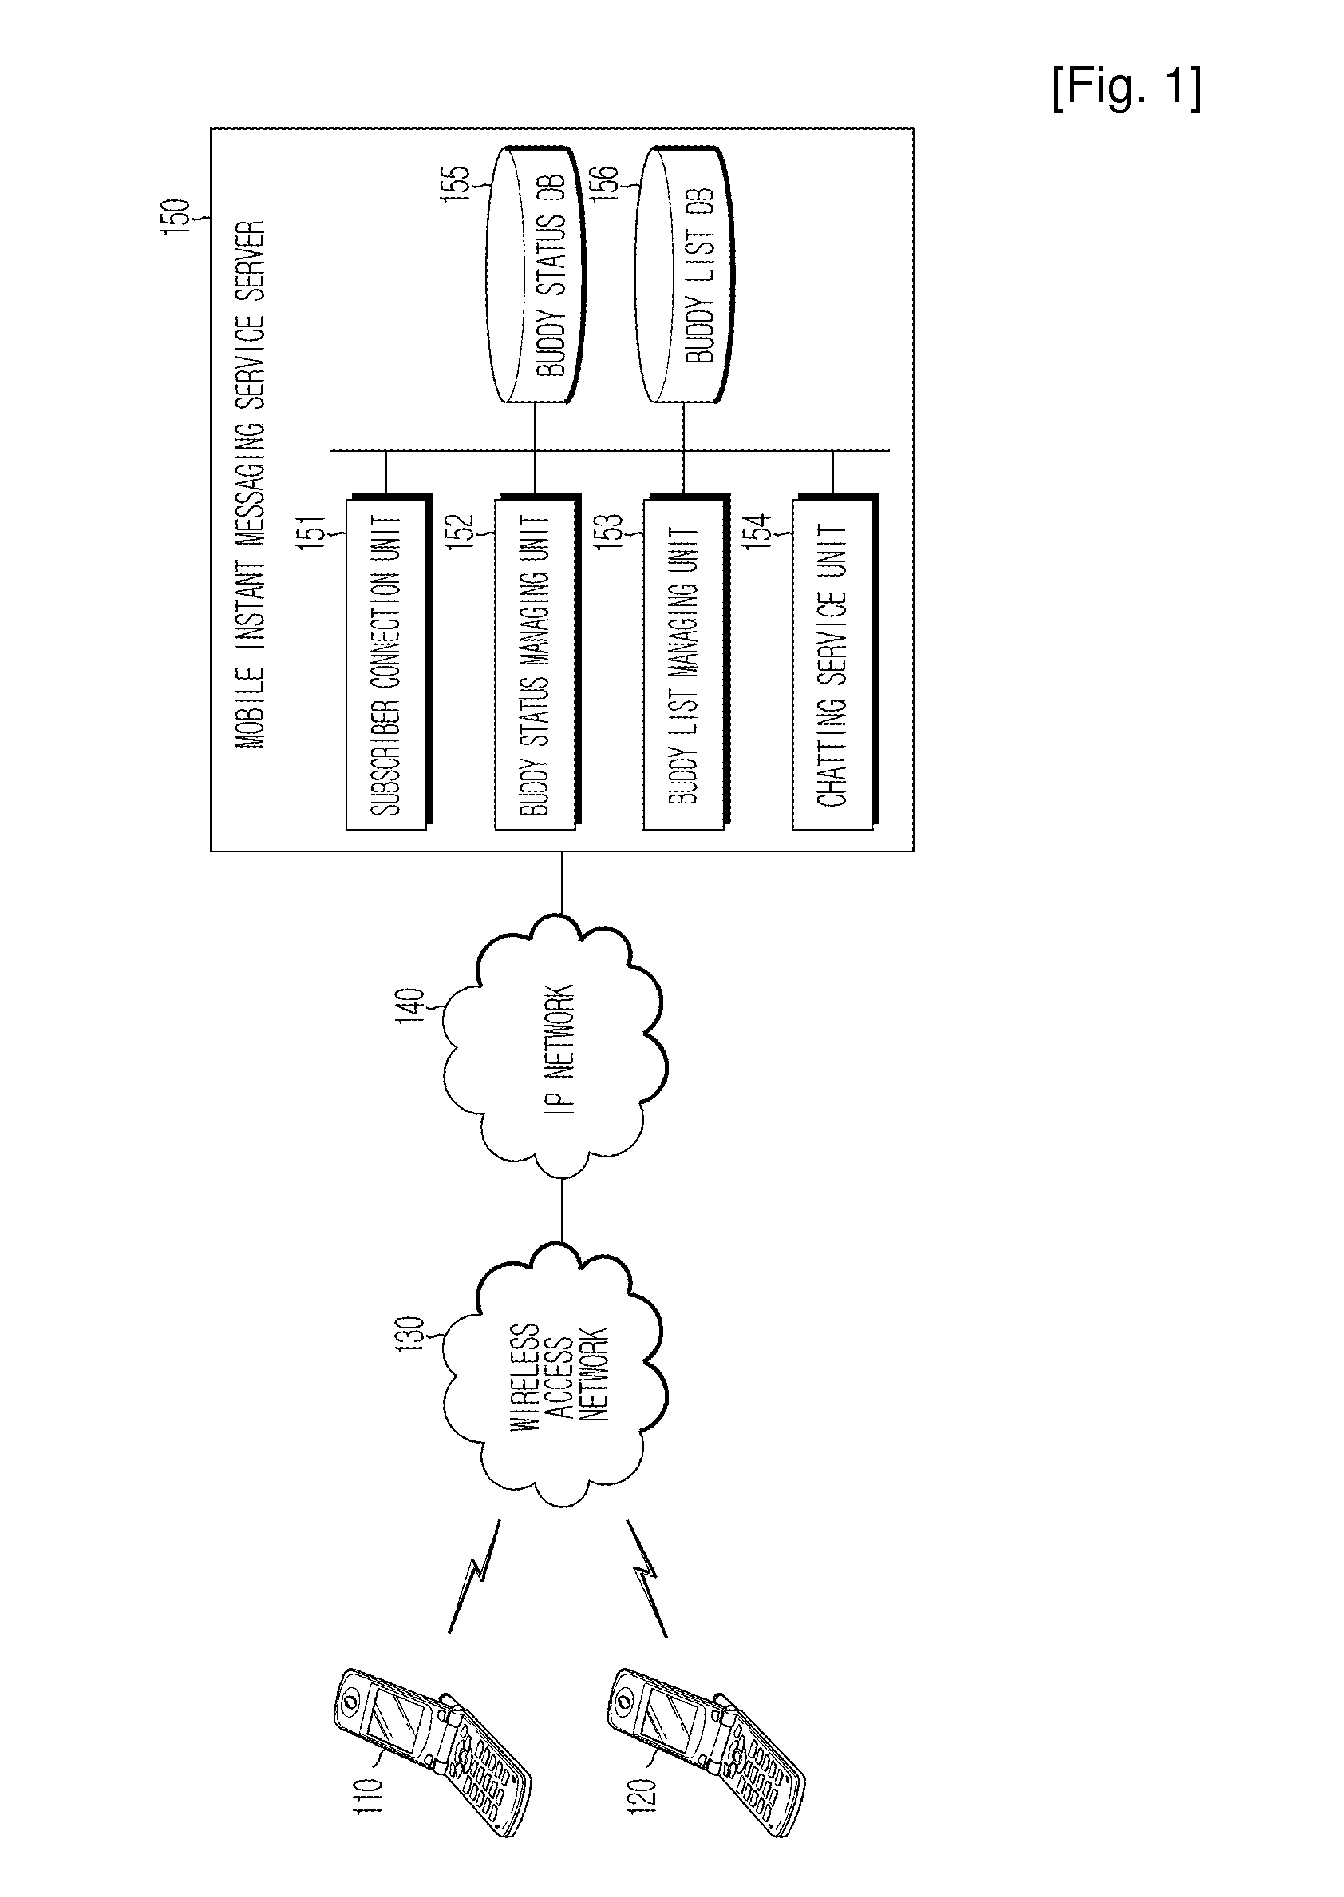 Apparatus and method for providing mobile instant messaging service